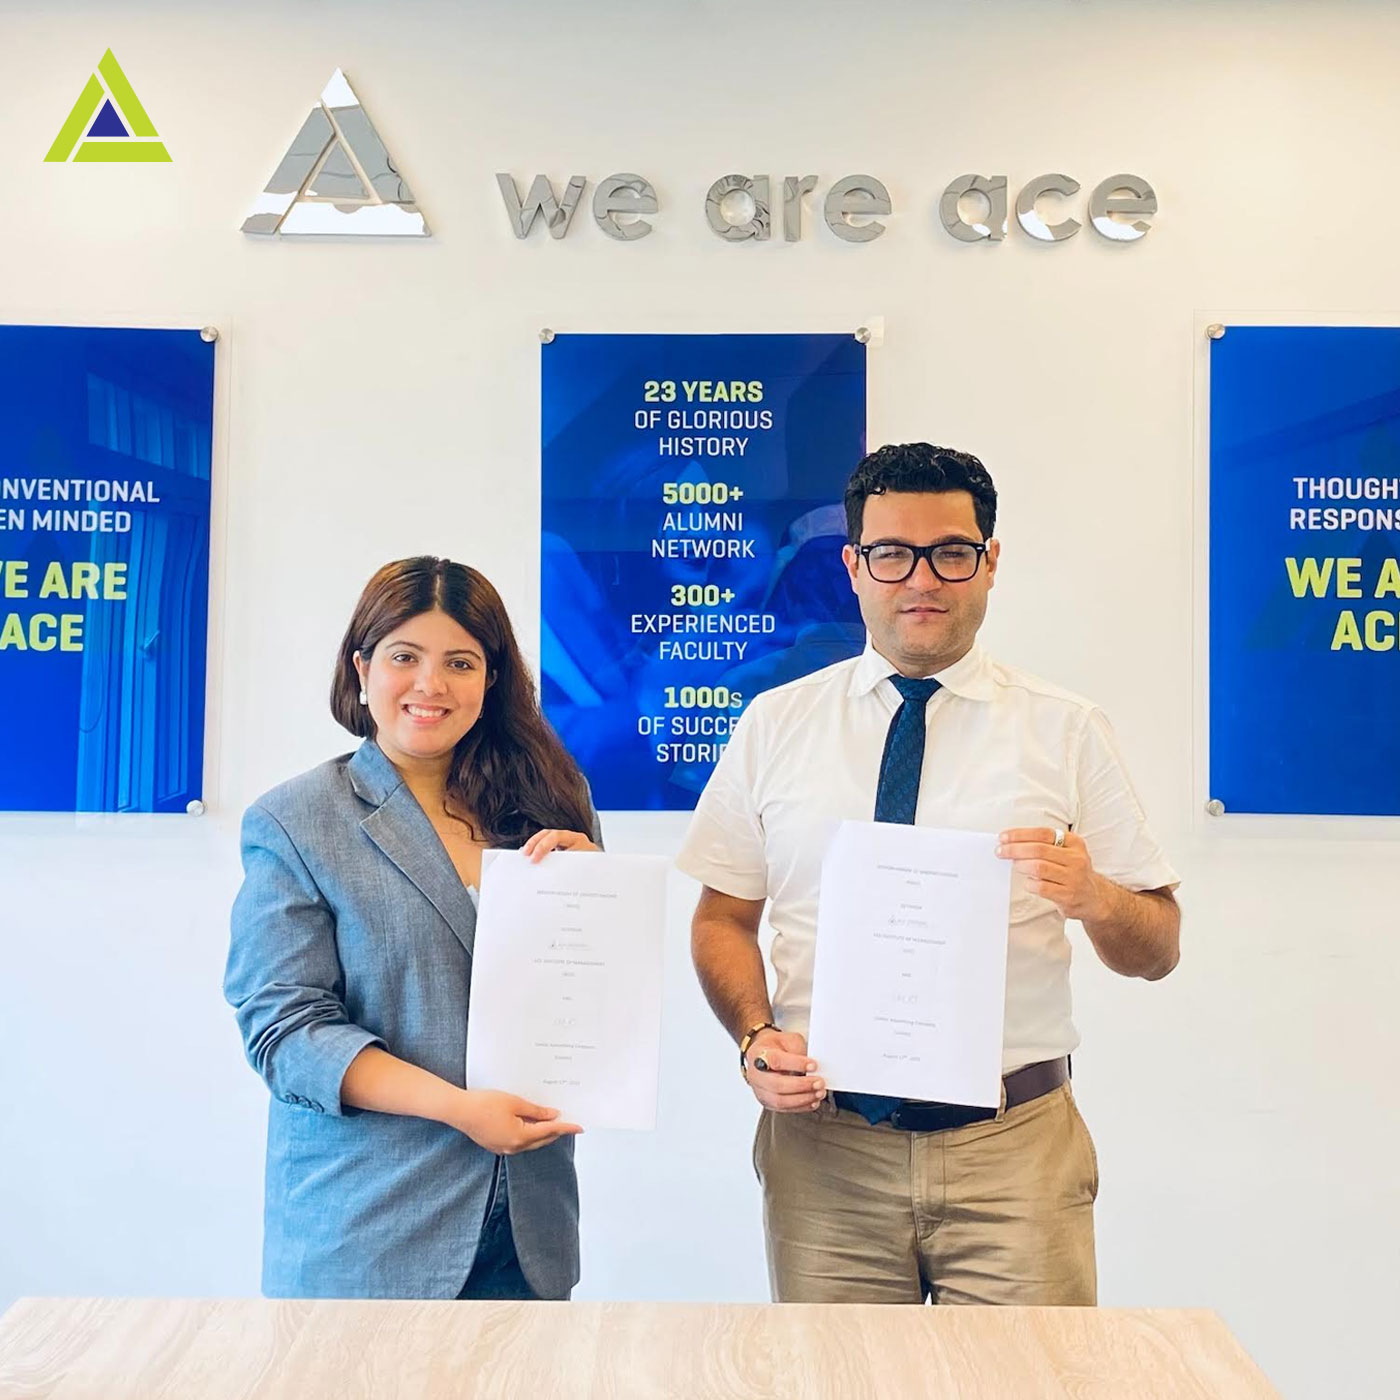 A Memorandum of Understanding (MoU) was signed between Ace Institute of Management and Limbic Advertising Company